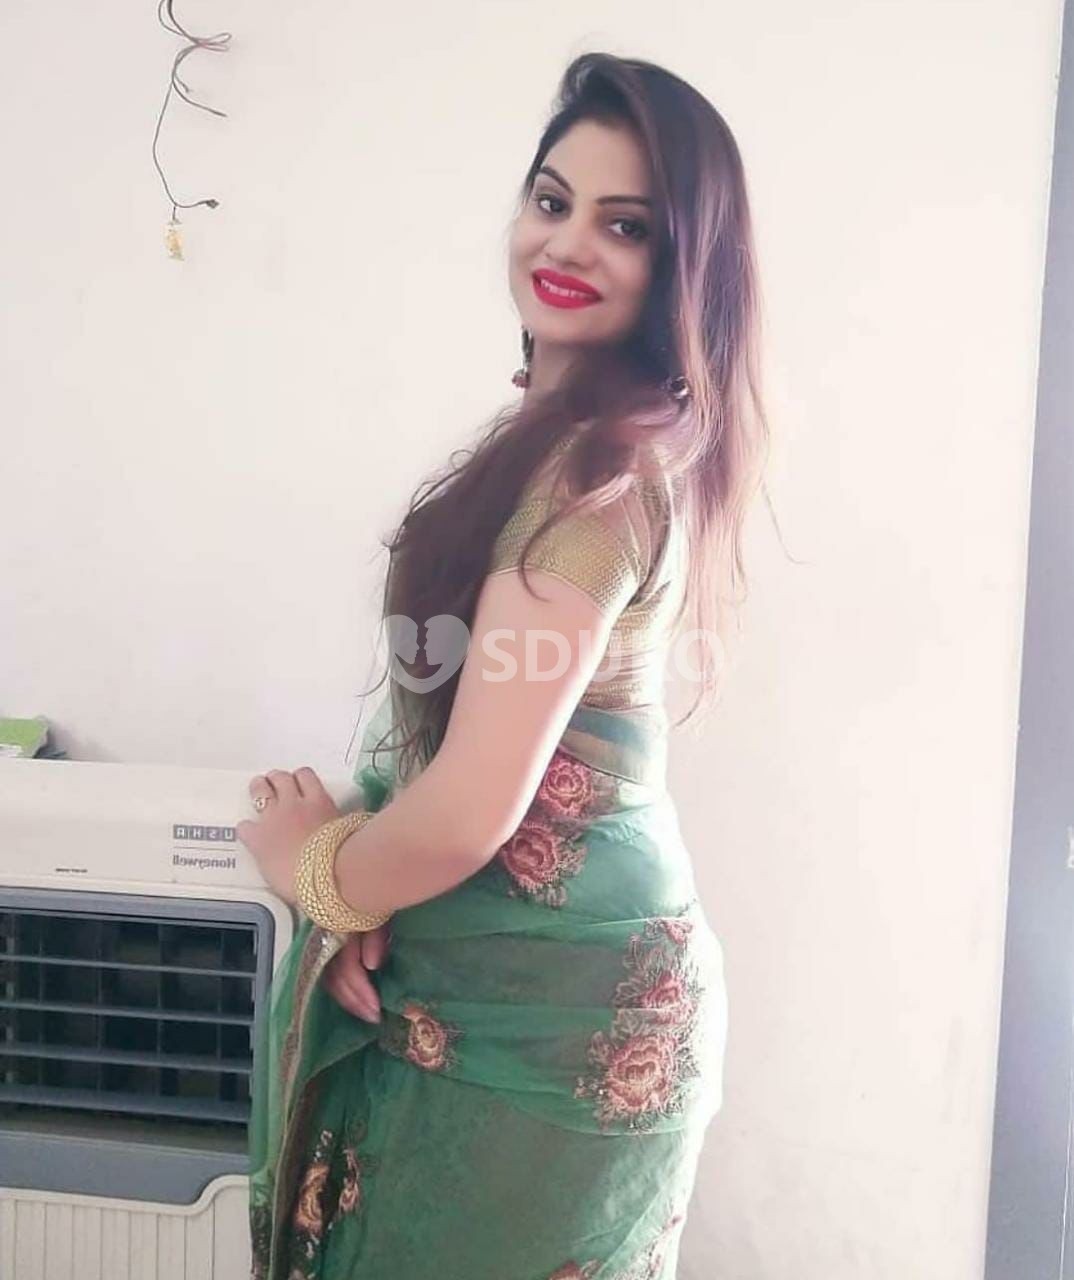 Surat myself Mallika..TODAY LOW PRICE 100%BEST HOT GIRLS SAFE AND SECURE GENUINE CALL GIRL AFFORDABLE PRICE BOTH OF YOU 